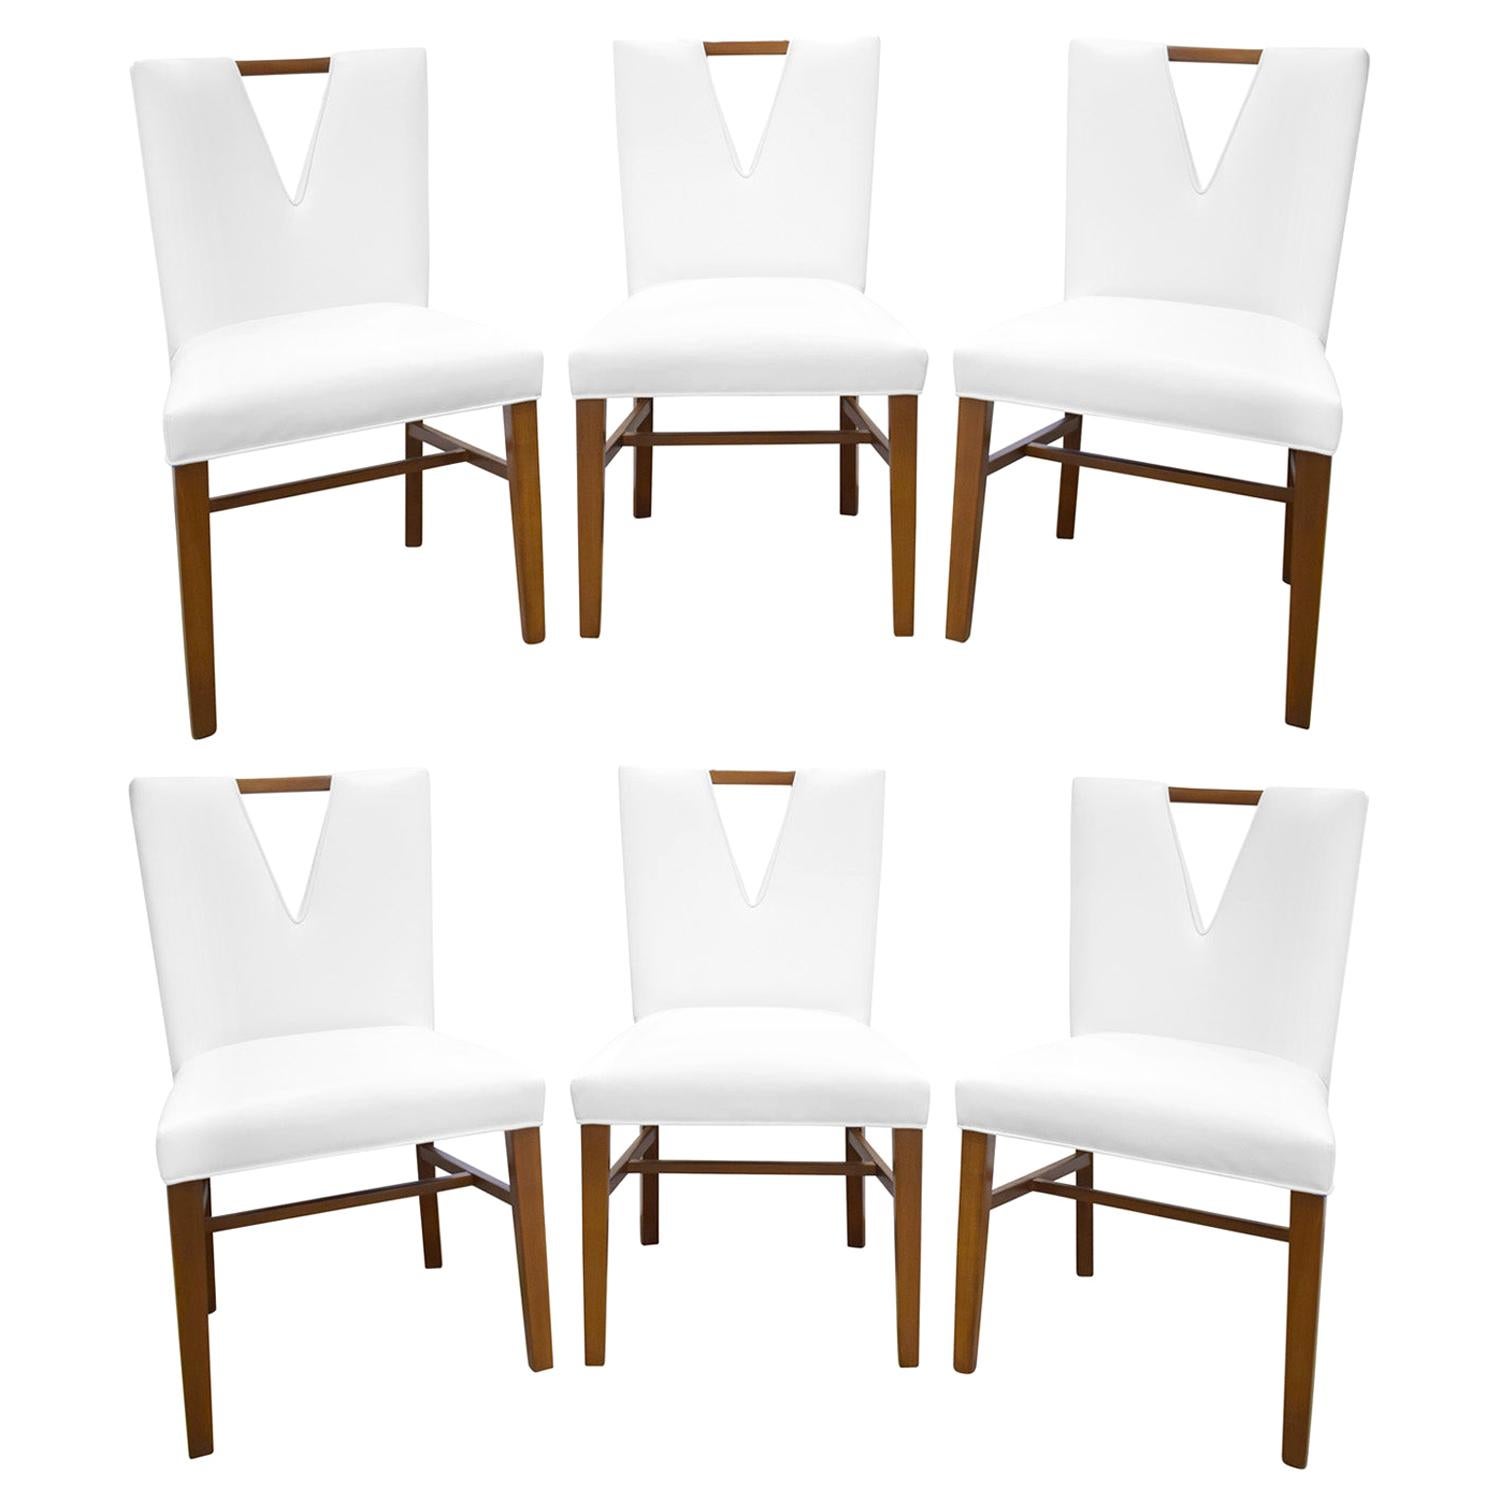 Paul Frankl Set of 6 Plunging Neckline Dining Chairs, 1950s